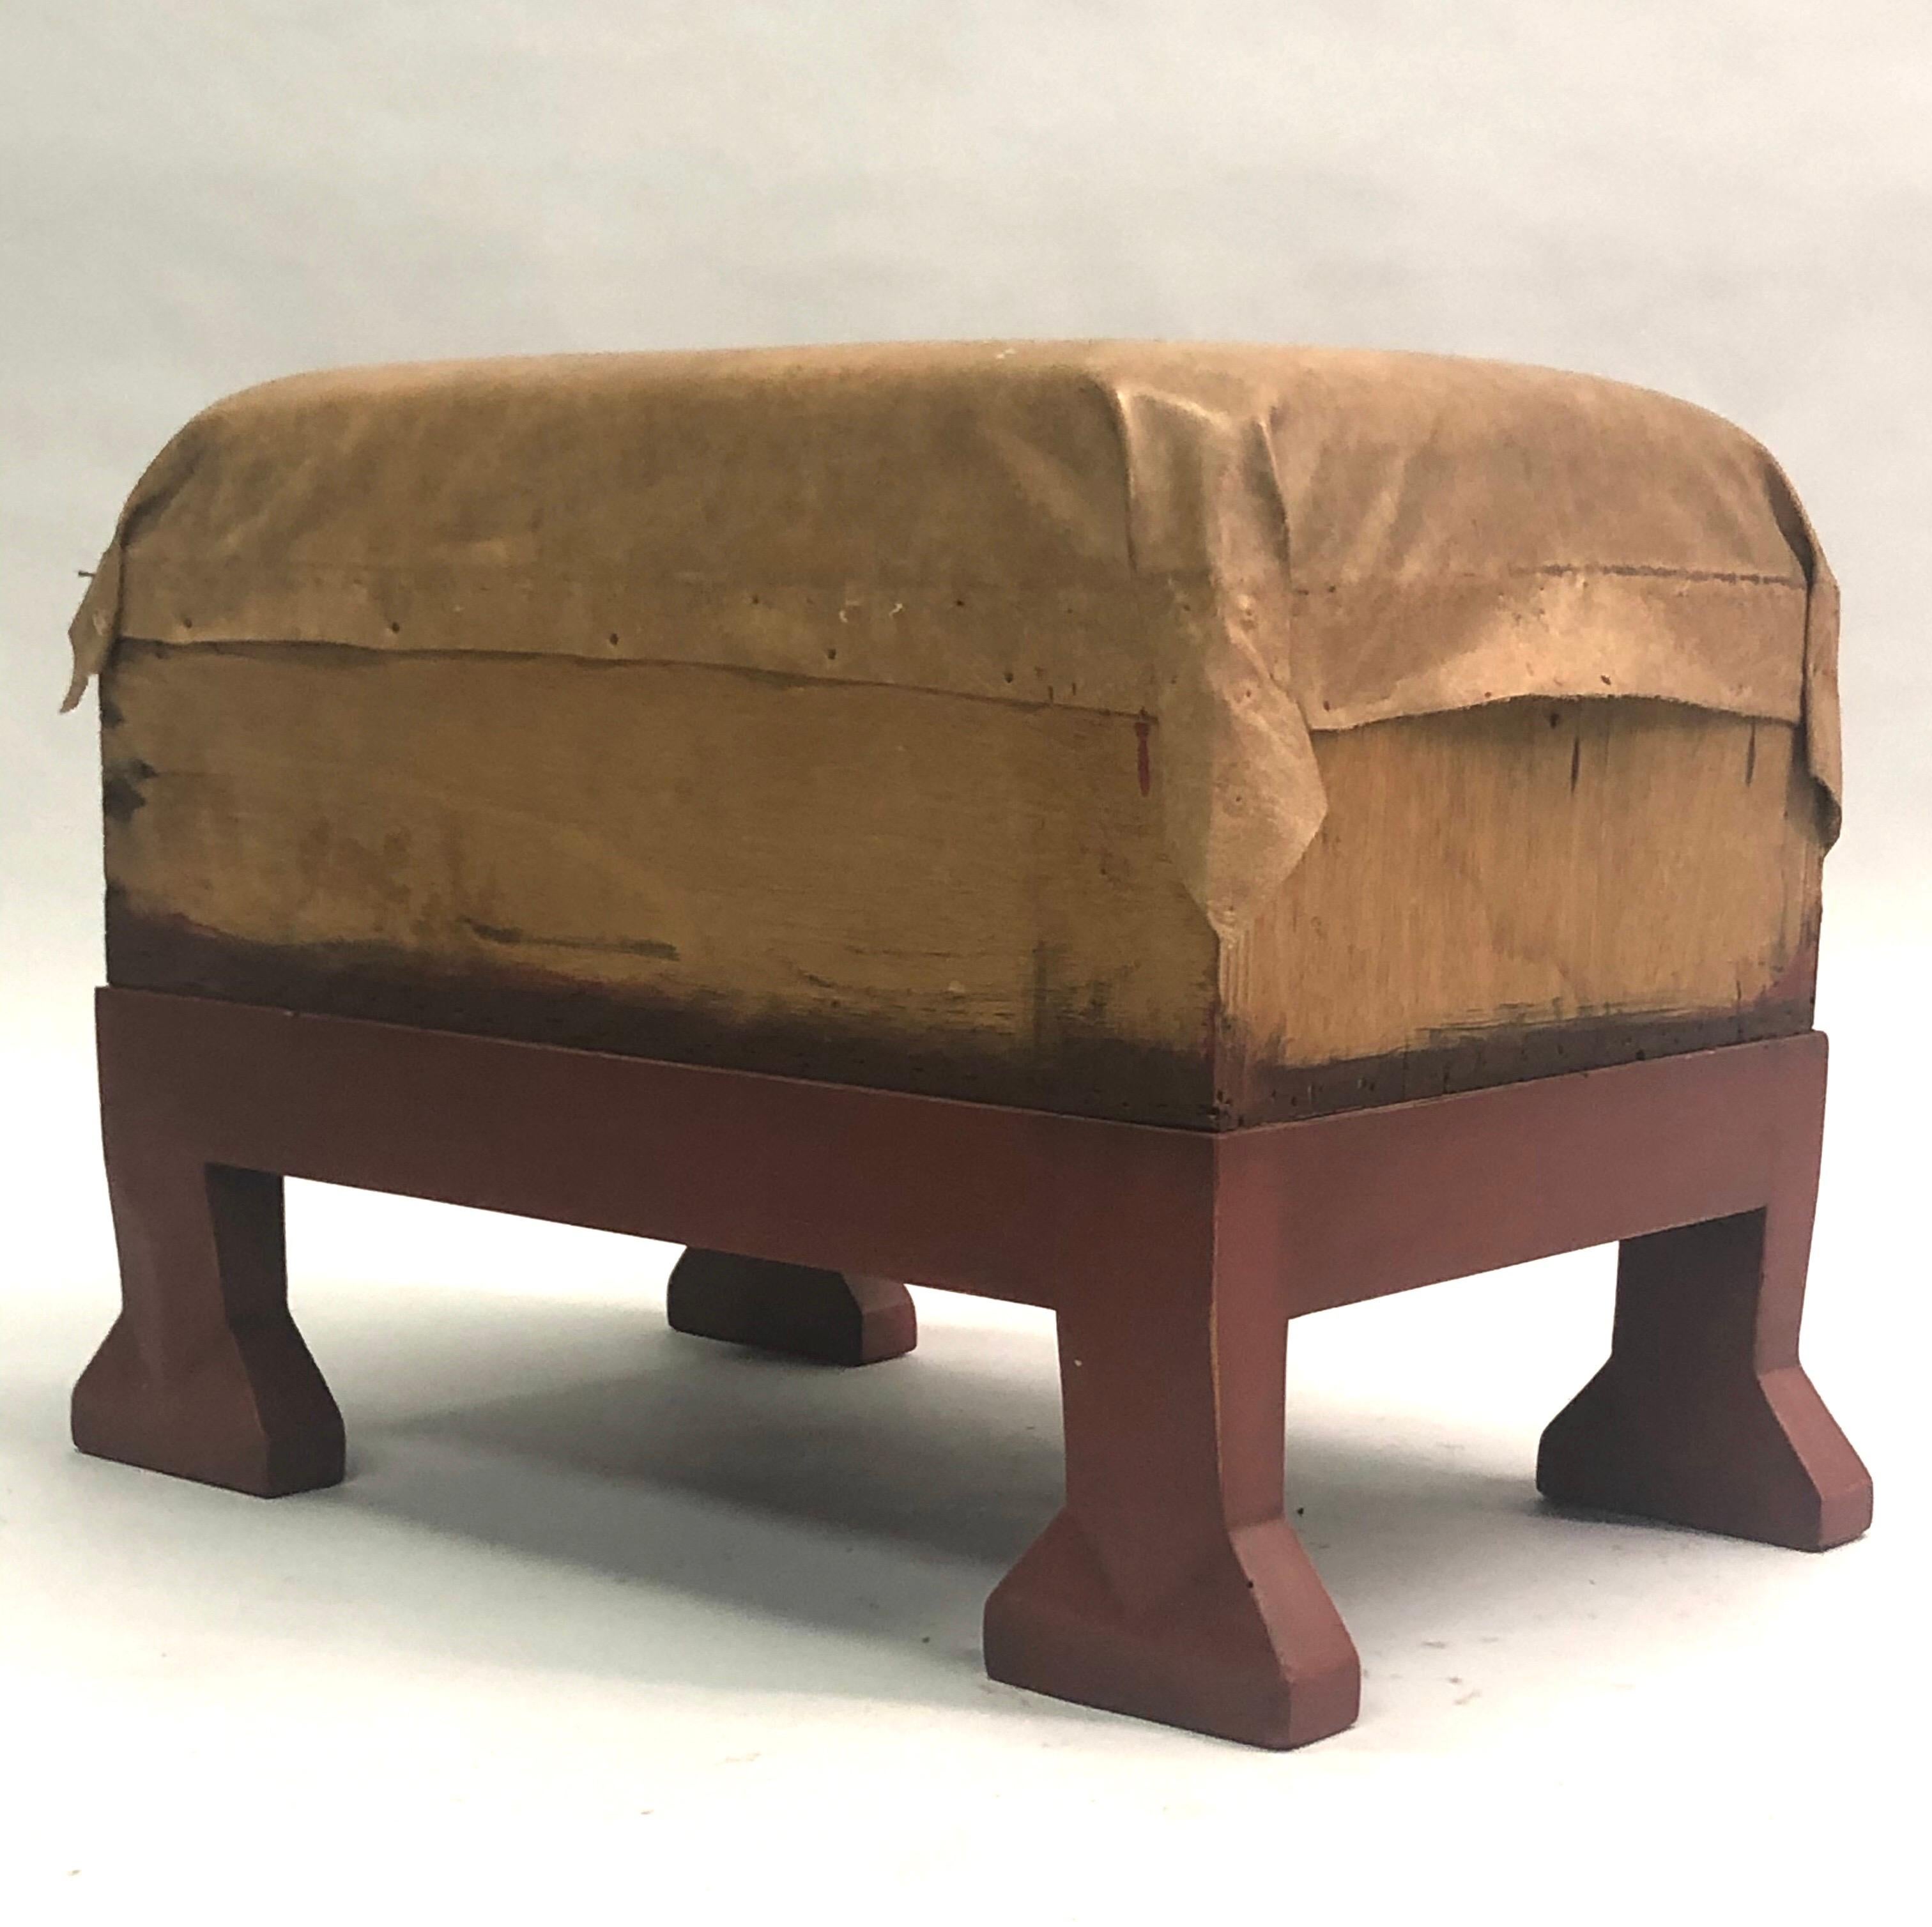 A sumptuous French midcentury wood stool, ottoman or bench influenced by Art Deco and the Neo-Egyptian style. The feet and frame is reflective of the modern neoclassical work of Marc Duplantier.

Seat needs to be upholstered.